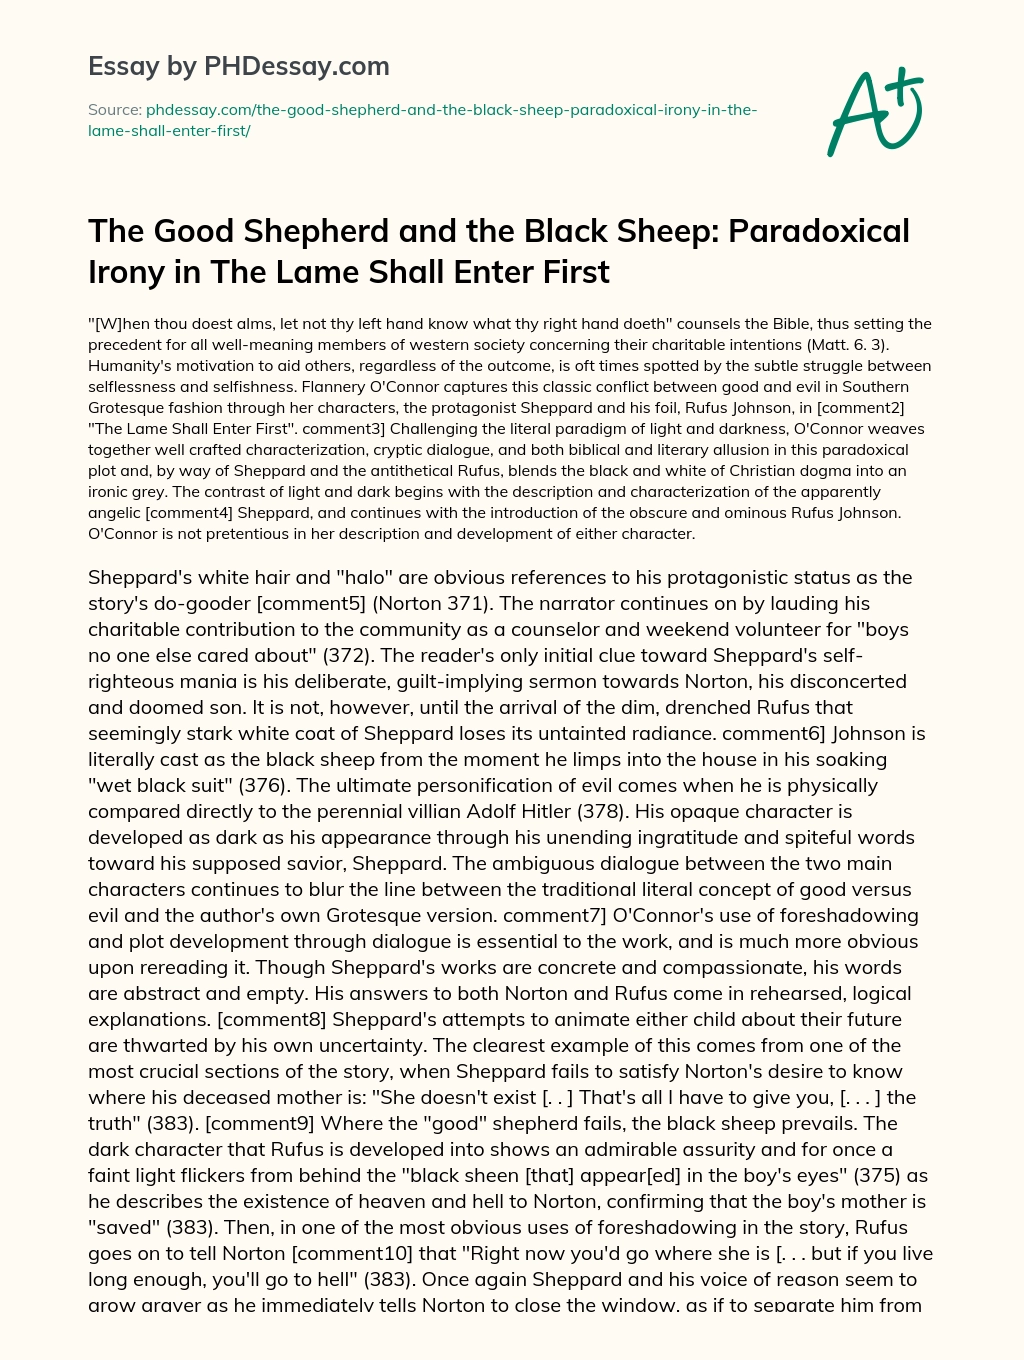 The Good Shepherd and the Black Sheep: Paradoxical Irony in The Lame Shall Enter First essay